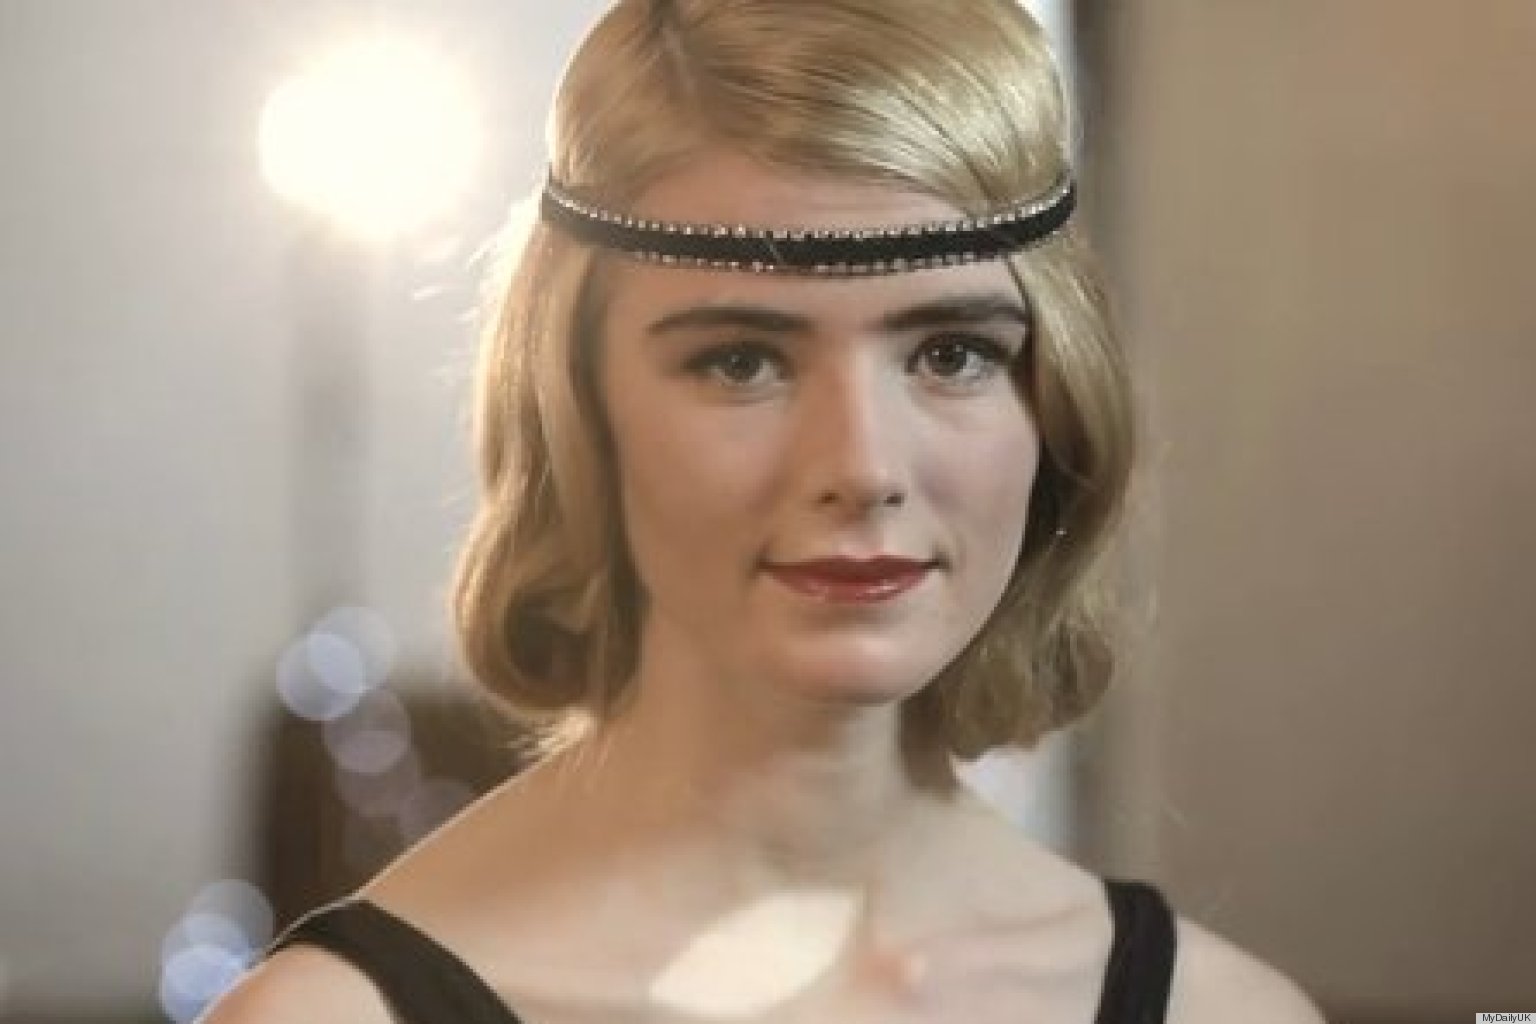 Flapper Girl Hair: How To Get A 1920s Waves Hairstyle (VIDEO)